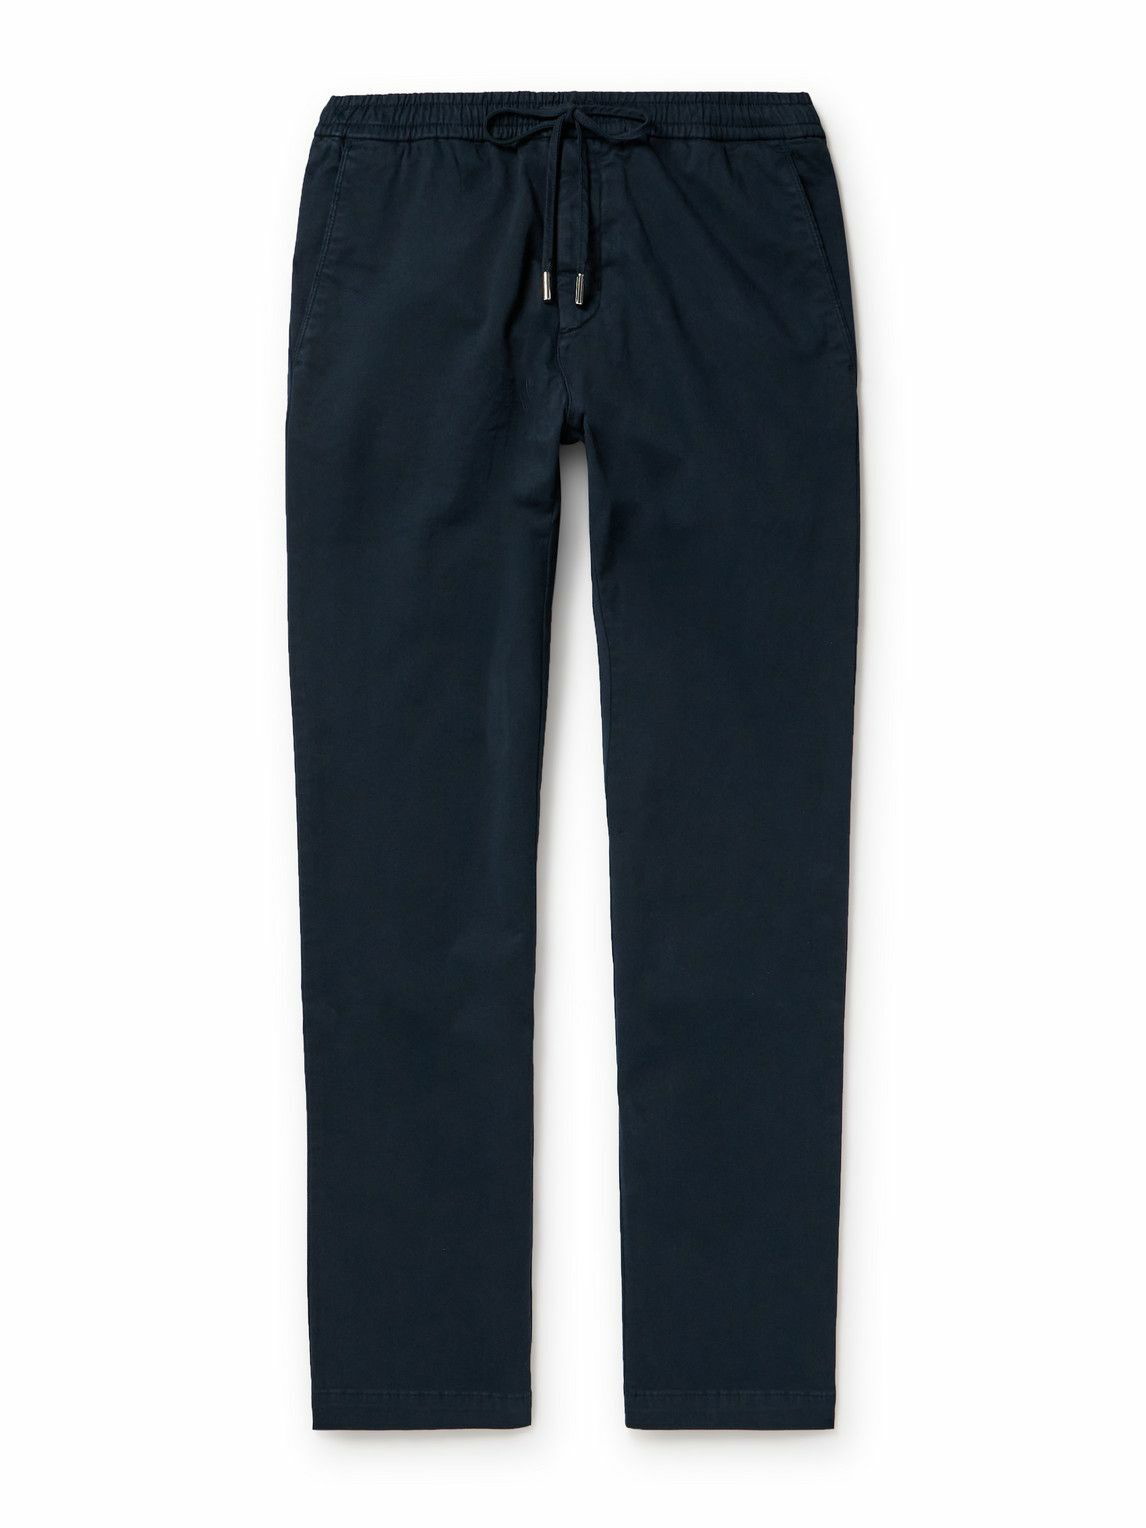 Buy Louis Philippe Sport Navy Blue Cotton Slim Fit Self Pattern Trousers  for Mens Online @ Tata CLiQ